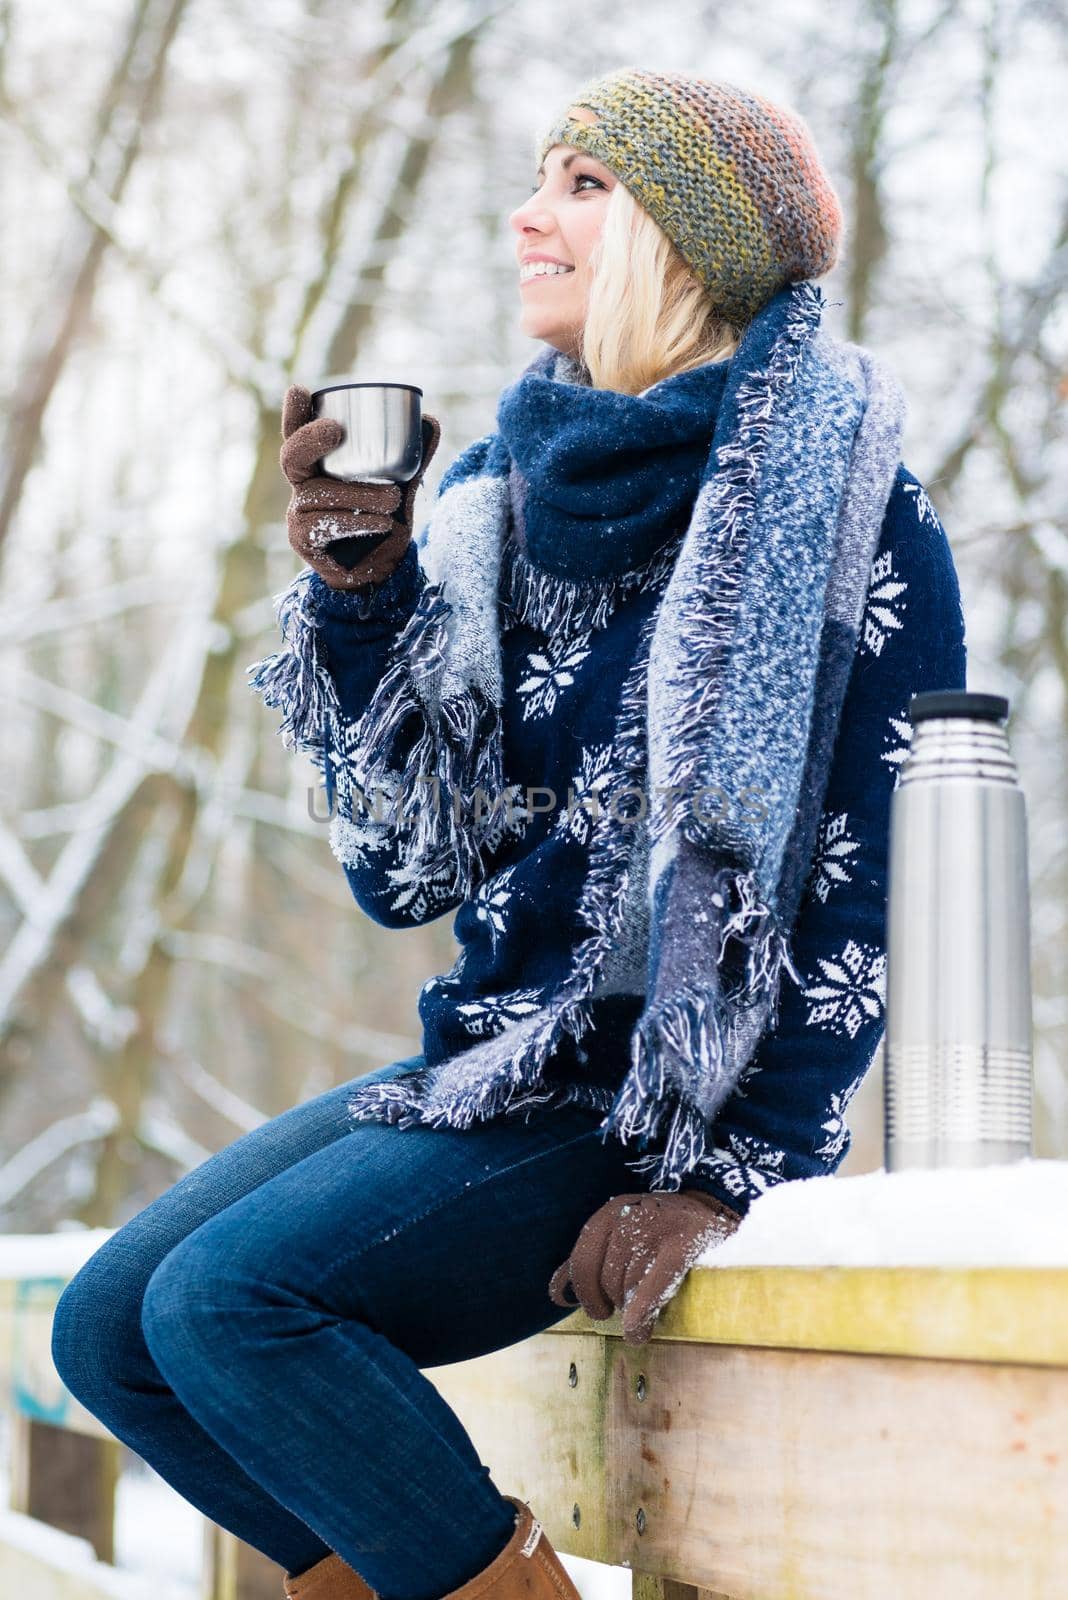 Woman freezing on a cold winter day warming herself up with hot drink in the snow